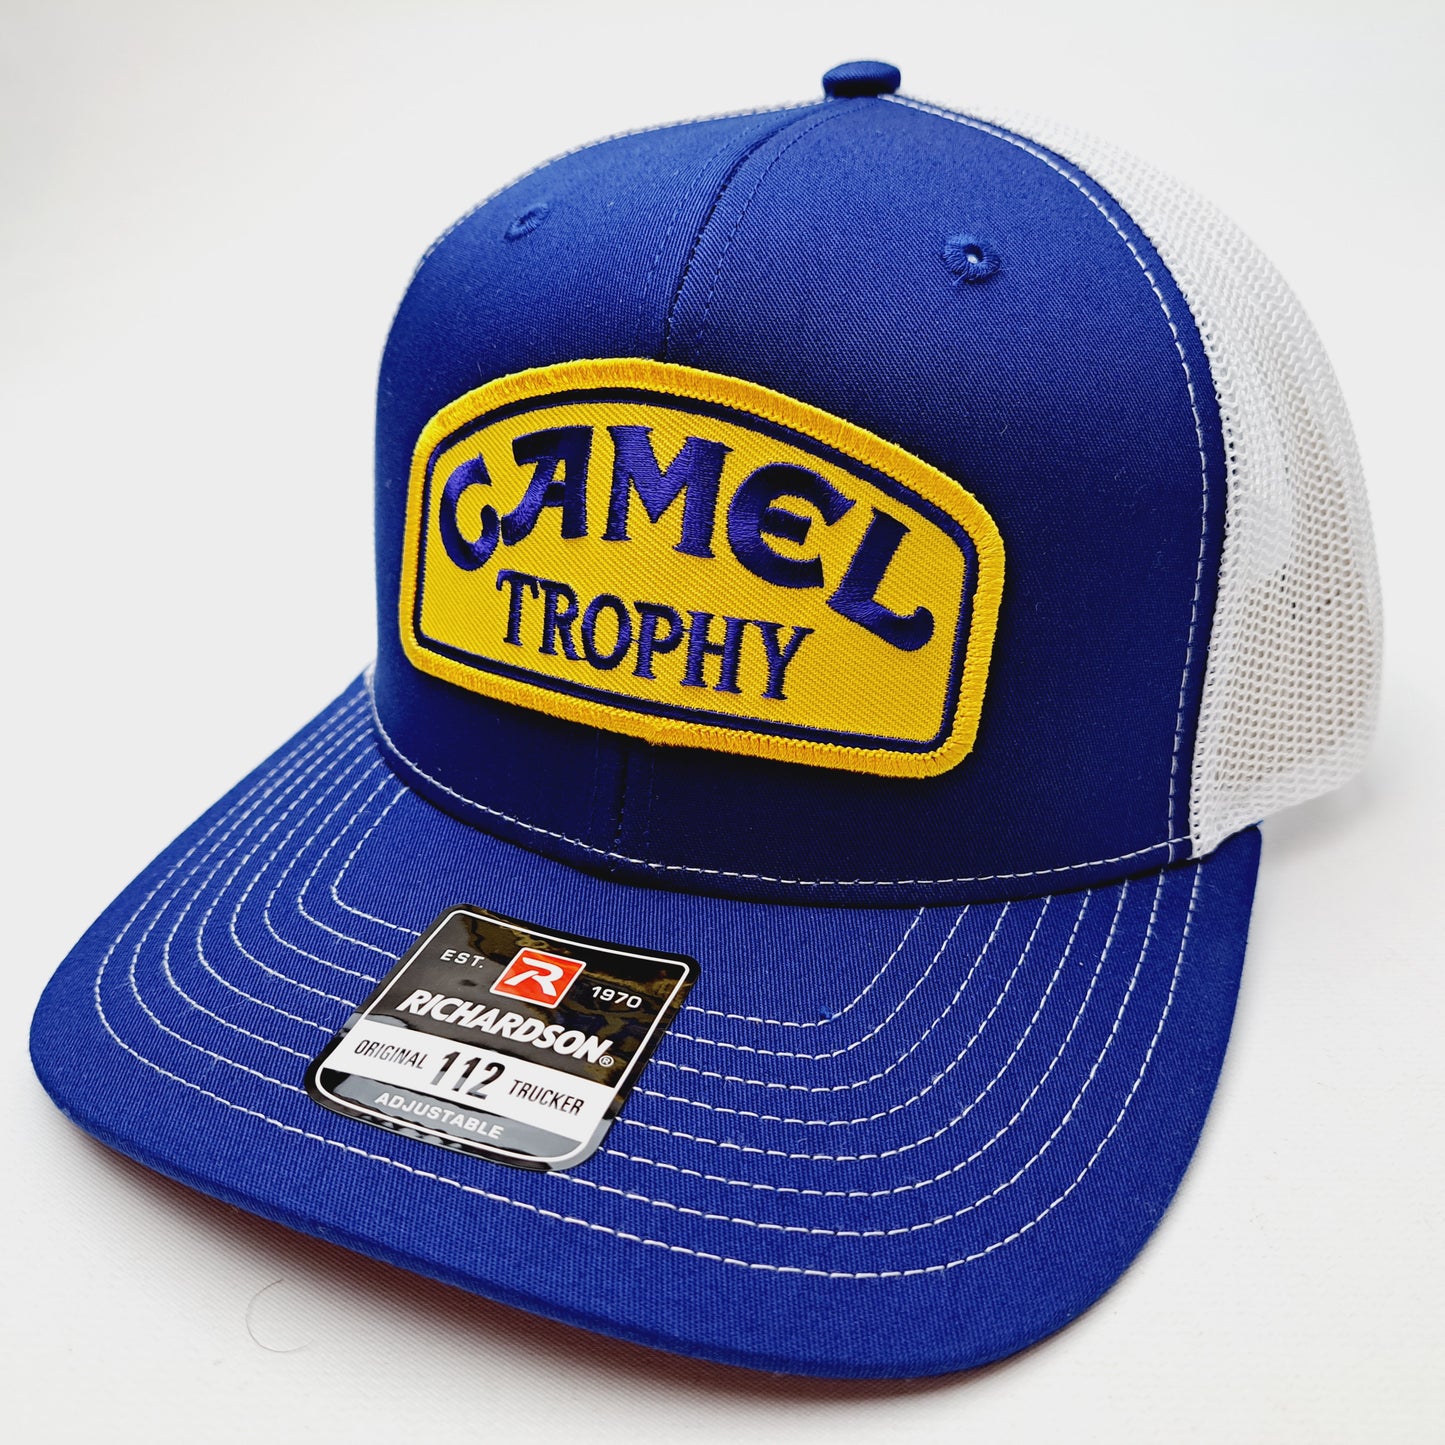 Camel Trophy Embroidered Patch Richardson 112 Trucker Mesh Snapback Cap Hat Blue & White